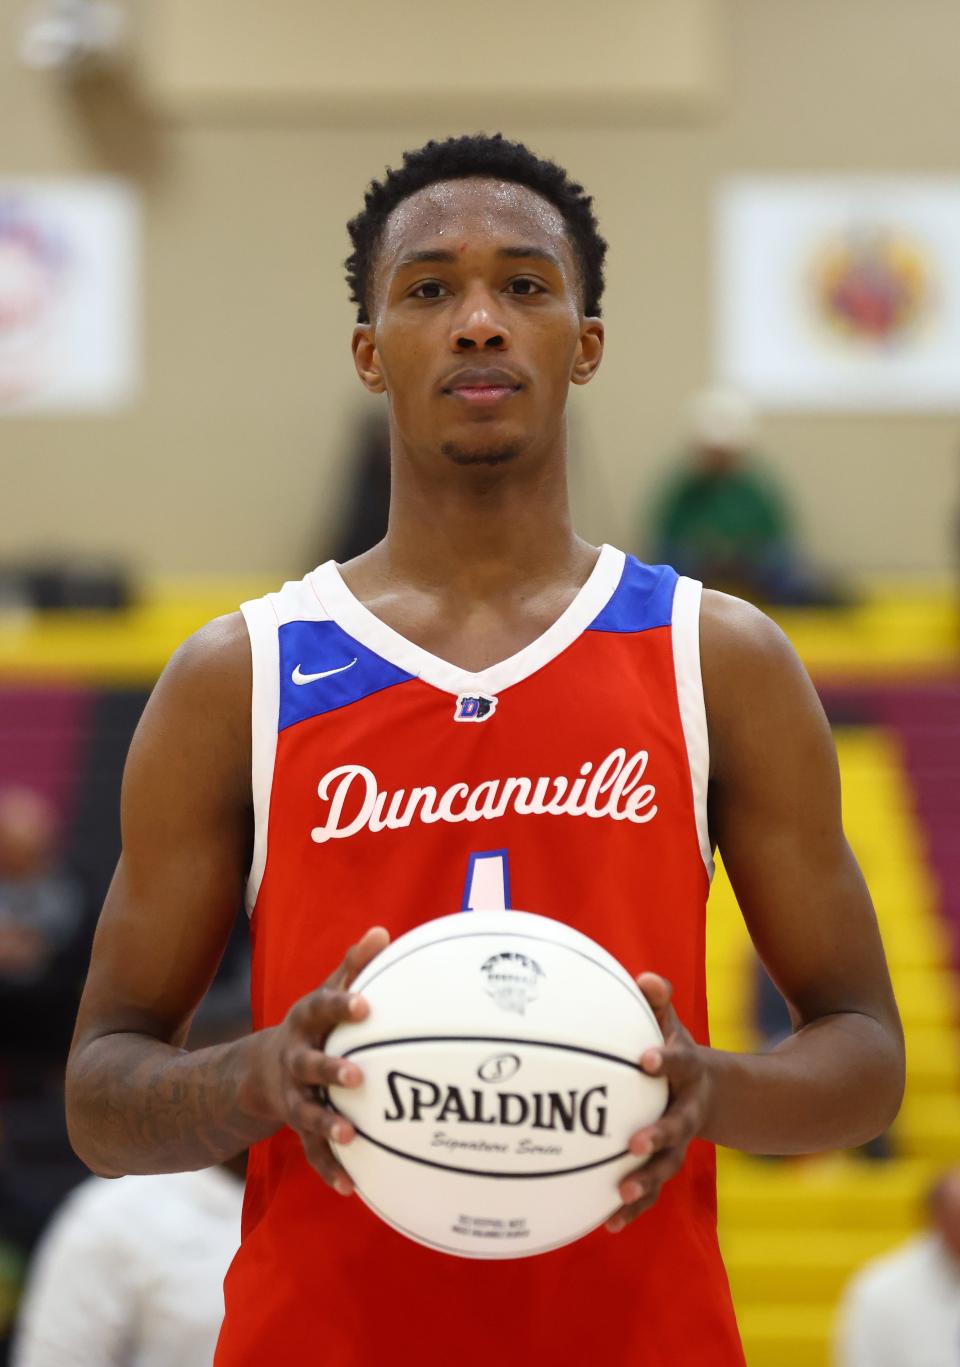 Duncanville High School forward Ron Holland, a McDonald's All-American who signed a letter of intent to play for Texas in November, announced on Friday his decommittment from Texas.